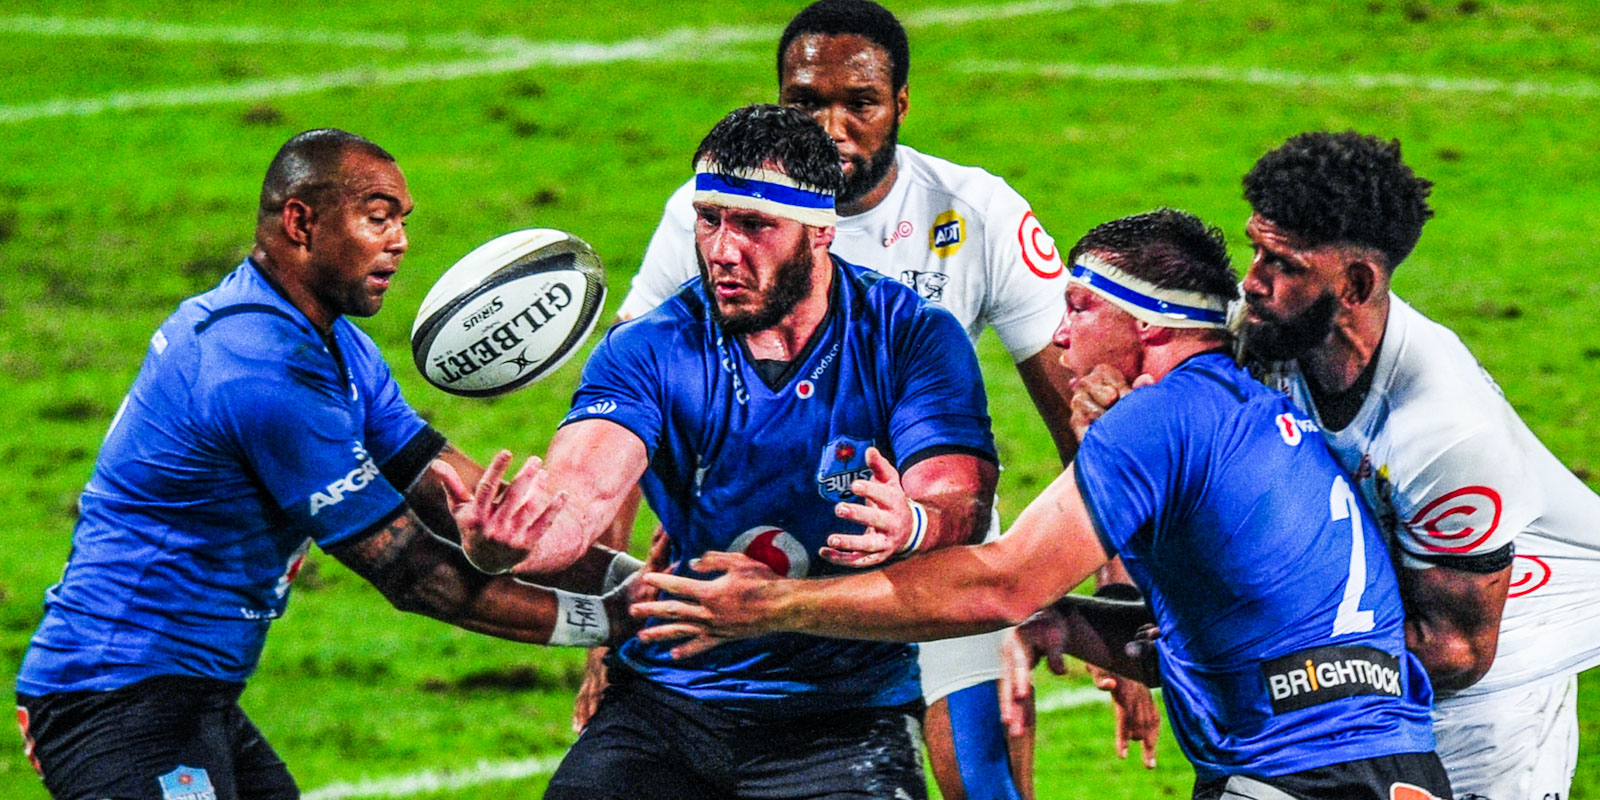 Vodacom Bulls captain Marcell Coetzee made the most offloads during the season, with 37.